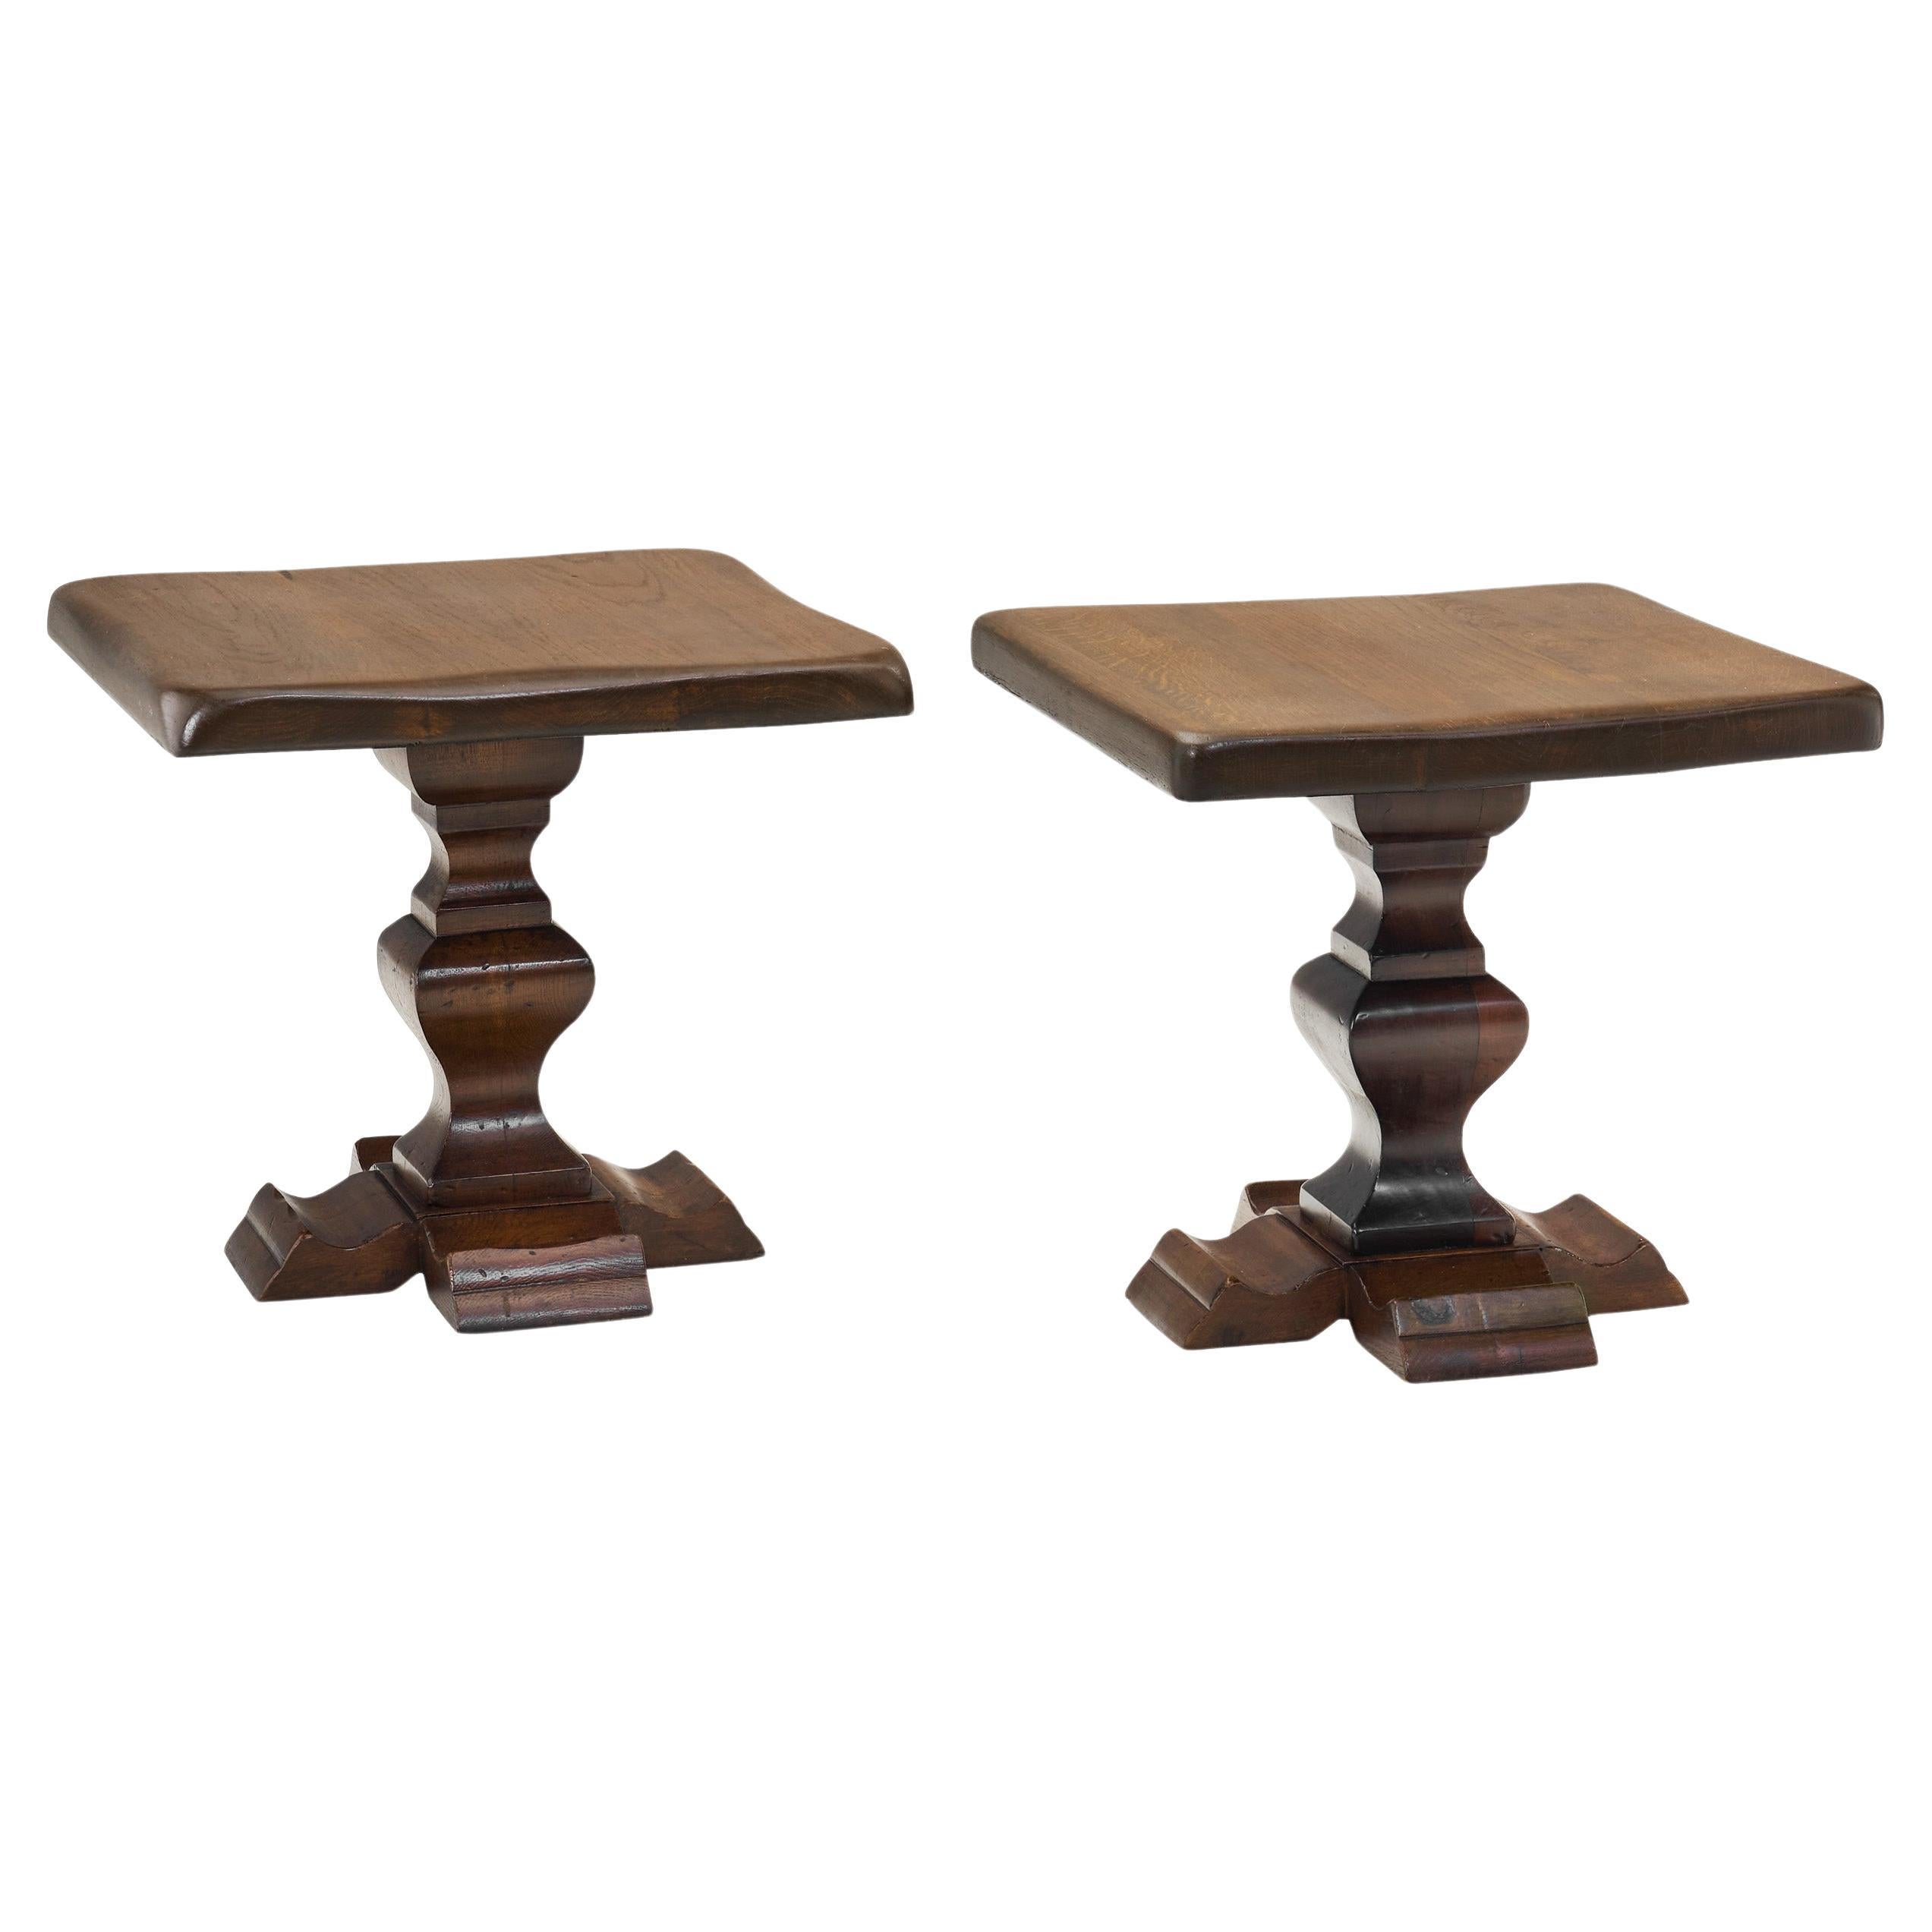 Set of Two Handcrafted Wood Side Tables, Europe 1970s For Sale